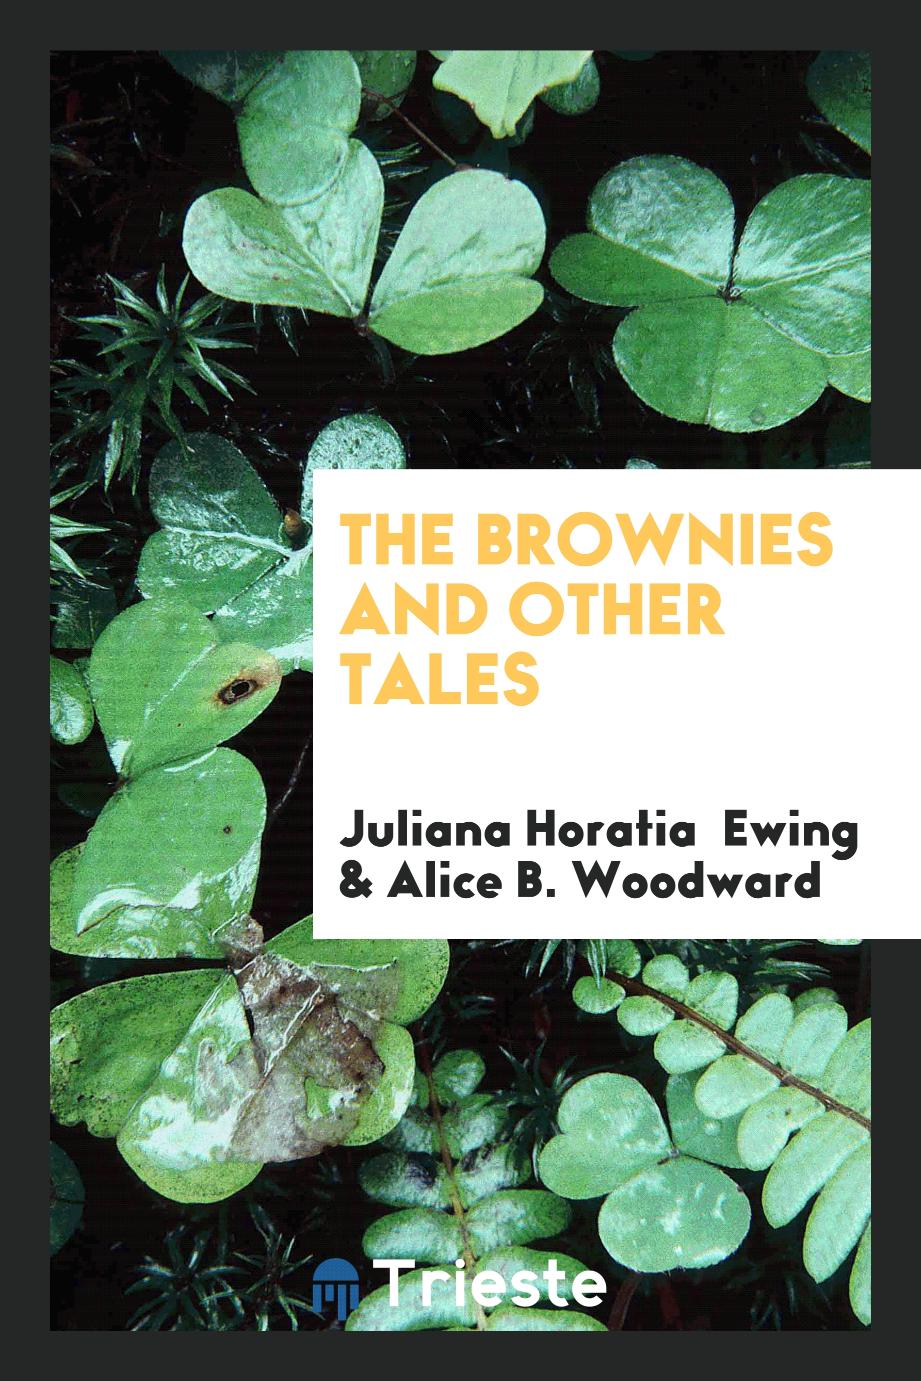 The brownies and other tales